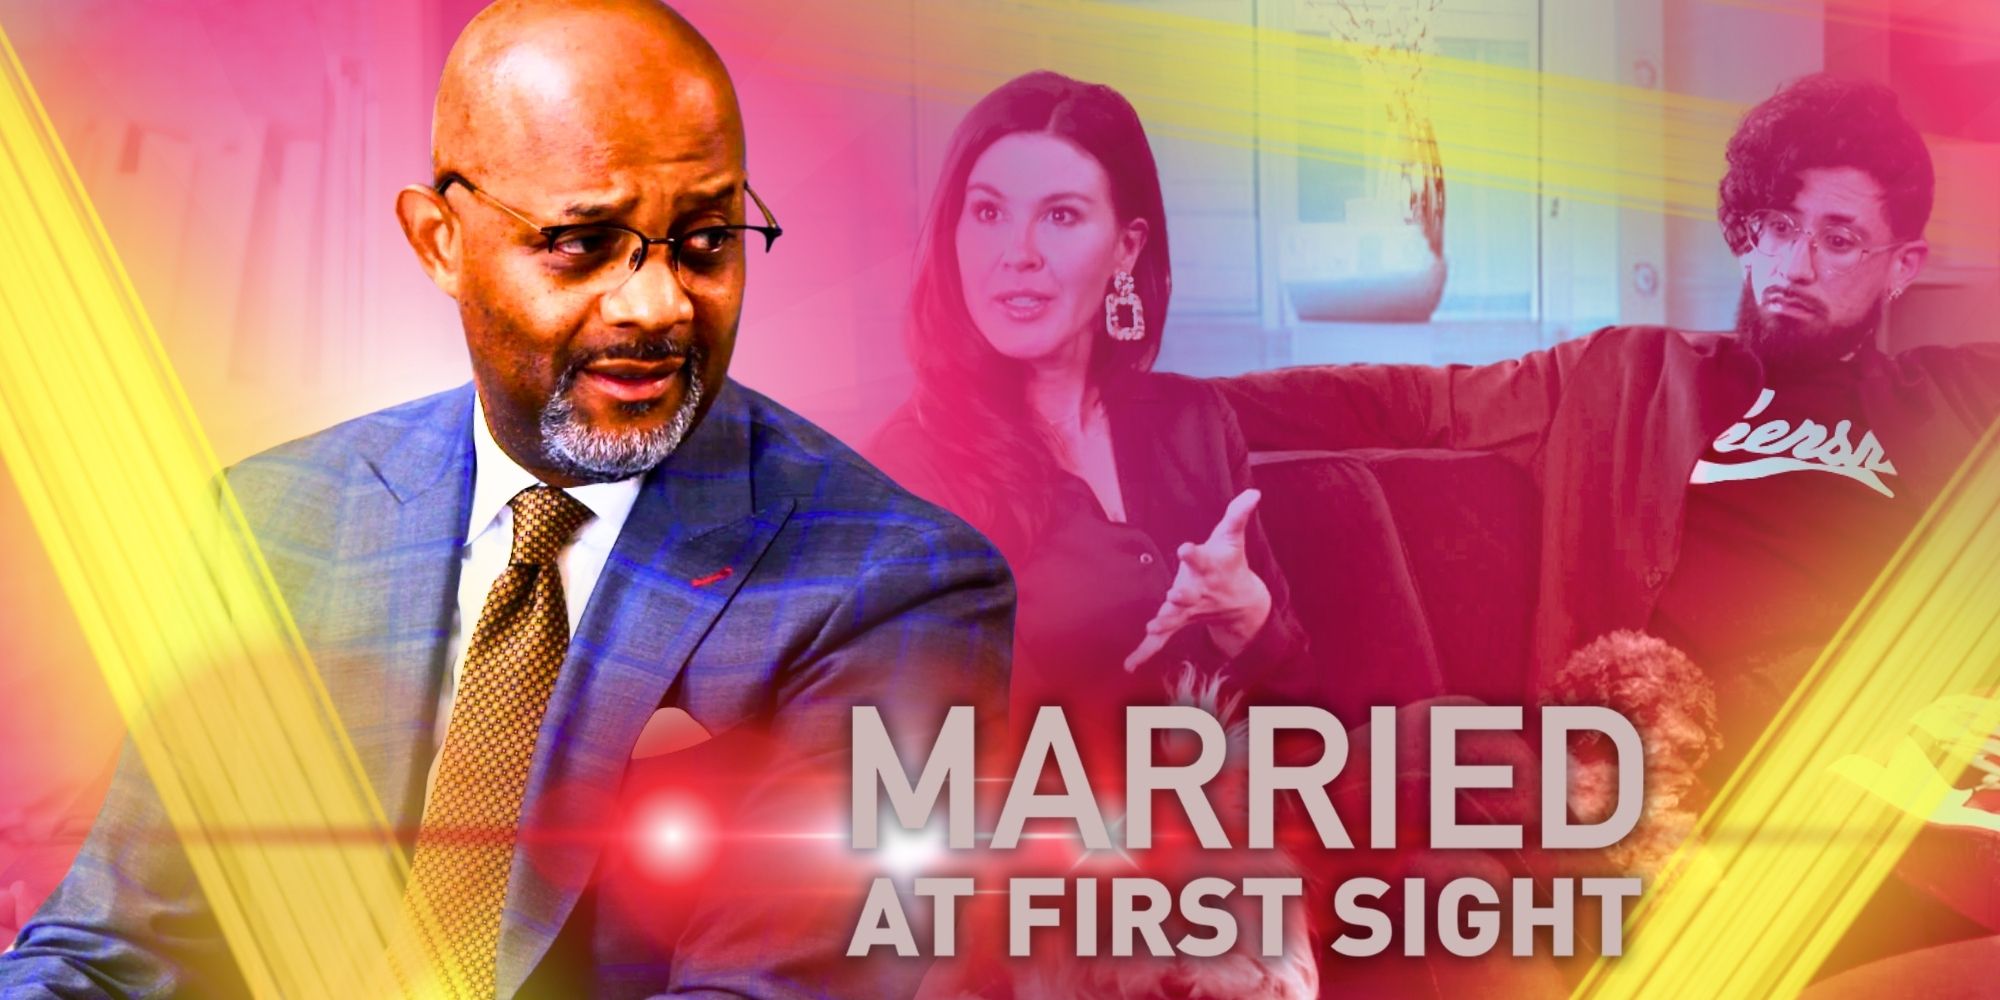 Married At First Sight Season 17 Pastor Cal with Michael & Chloe inset